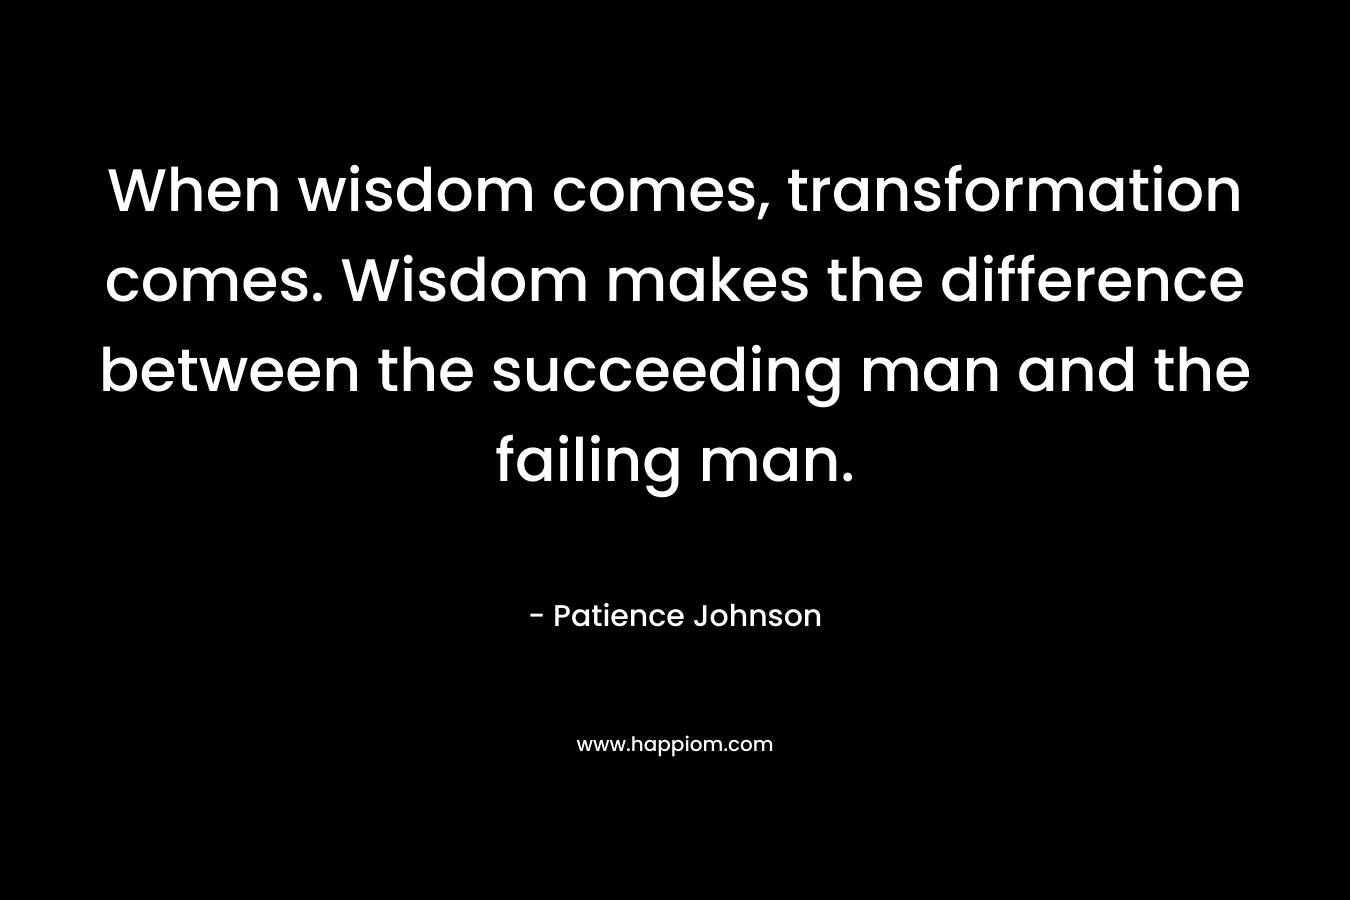 When wisdom comes, transformation comes. Wisdom makes the difference between the succeeding man and the failing man. – Patience Johnson